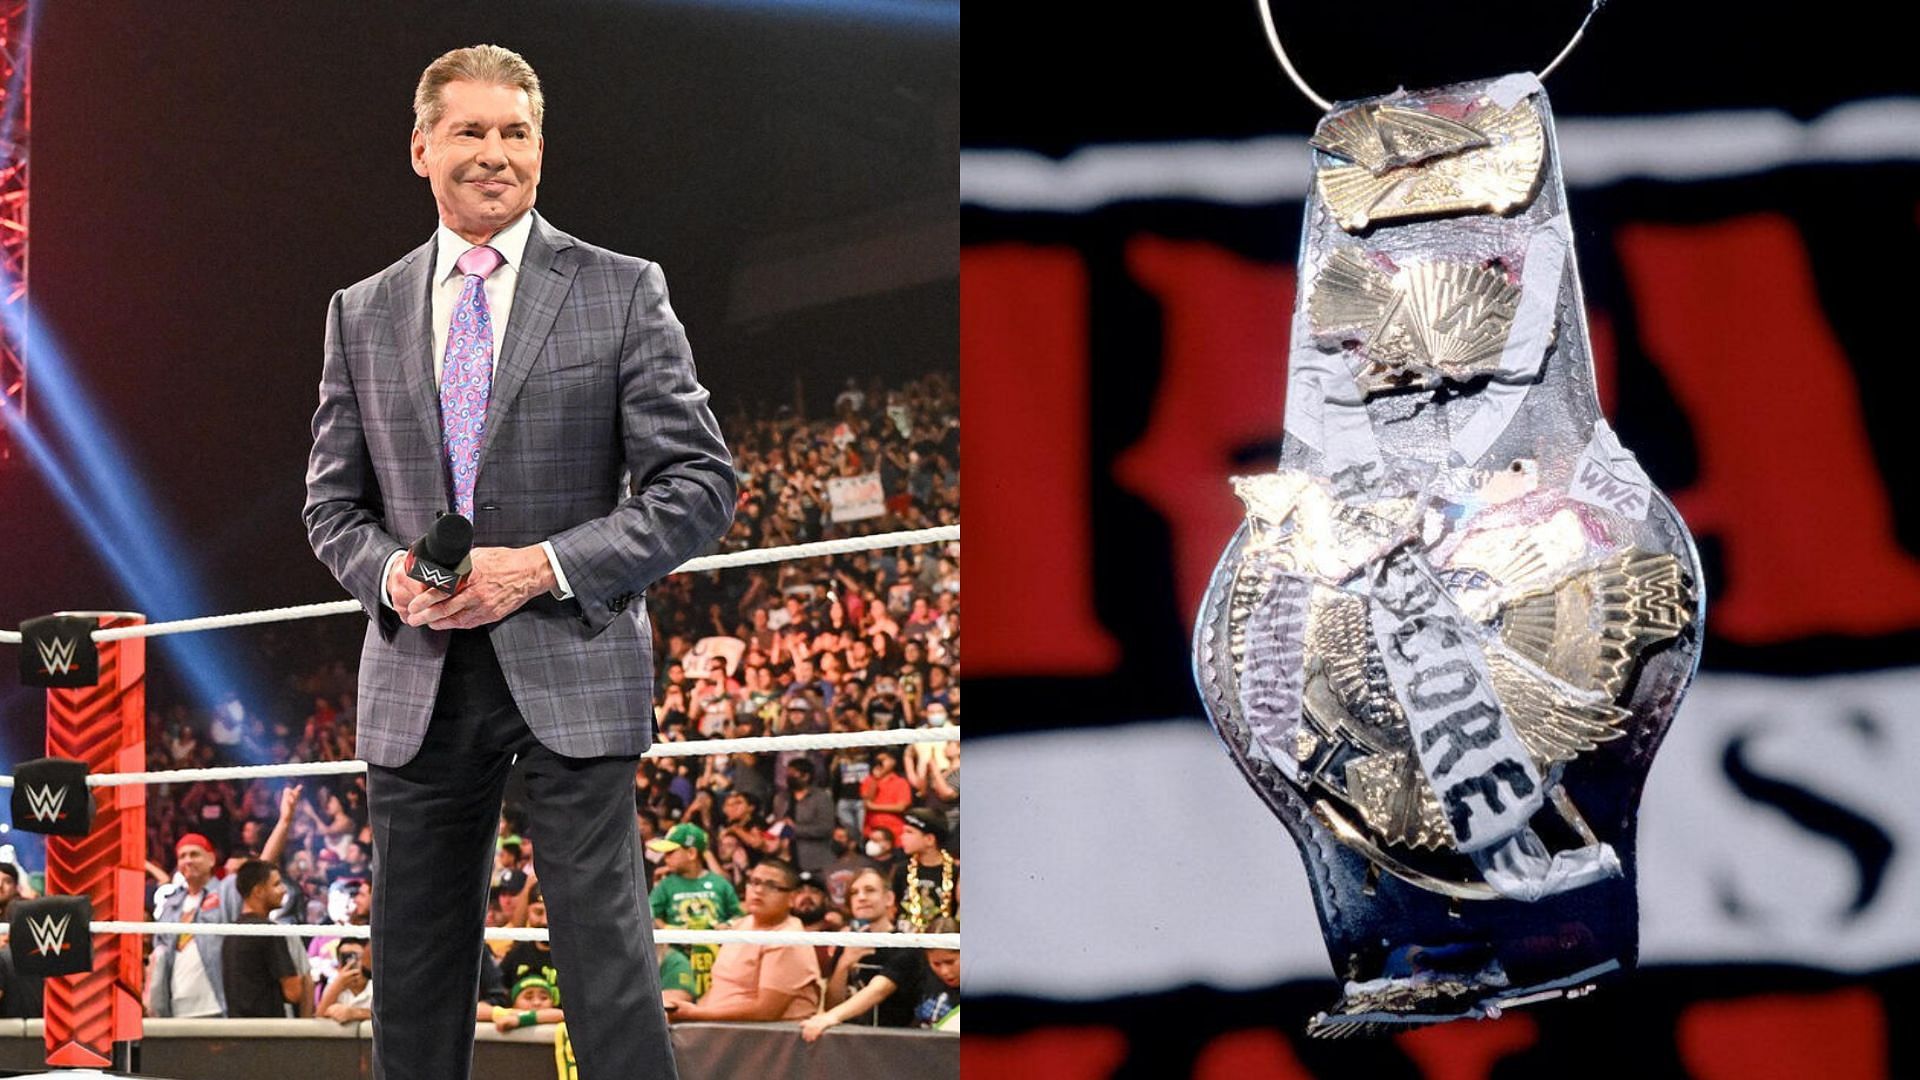 Vince McMahon introduced the Hardcore and 24/7 Championship under his regime!